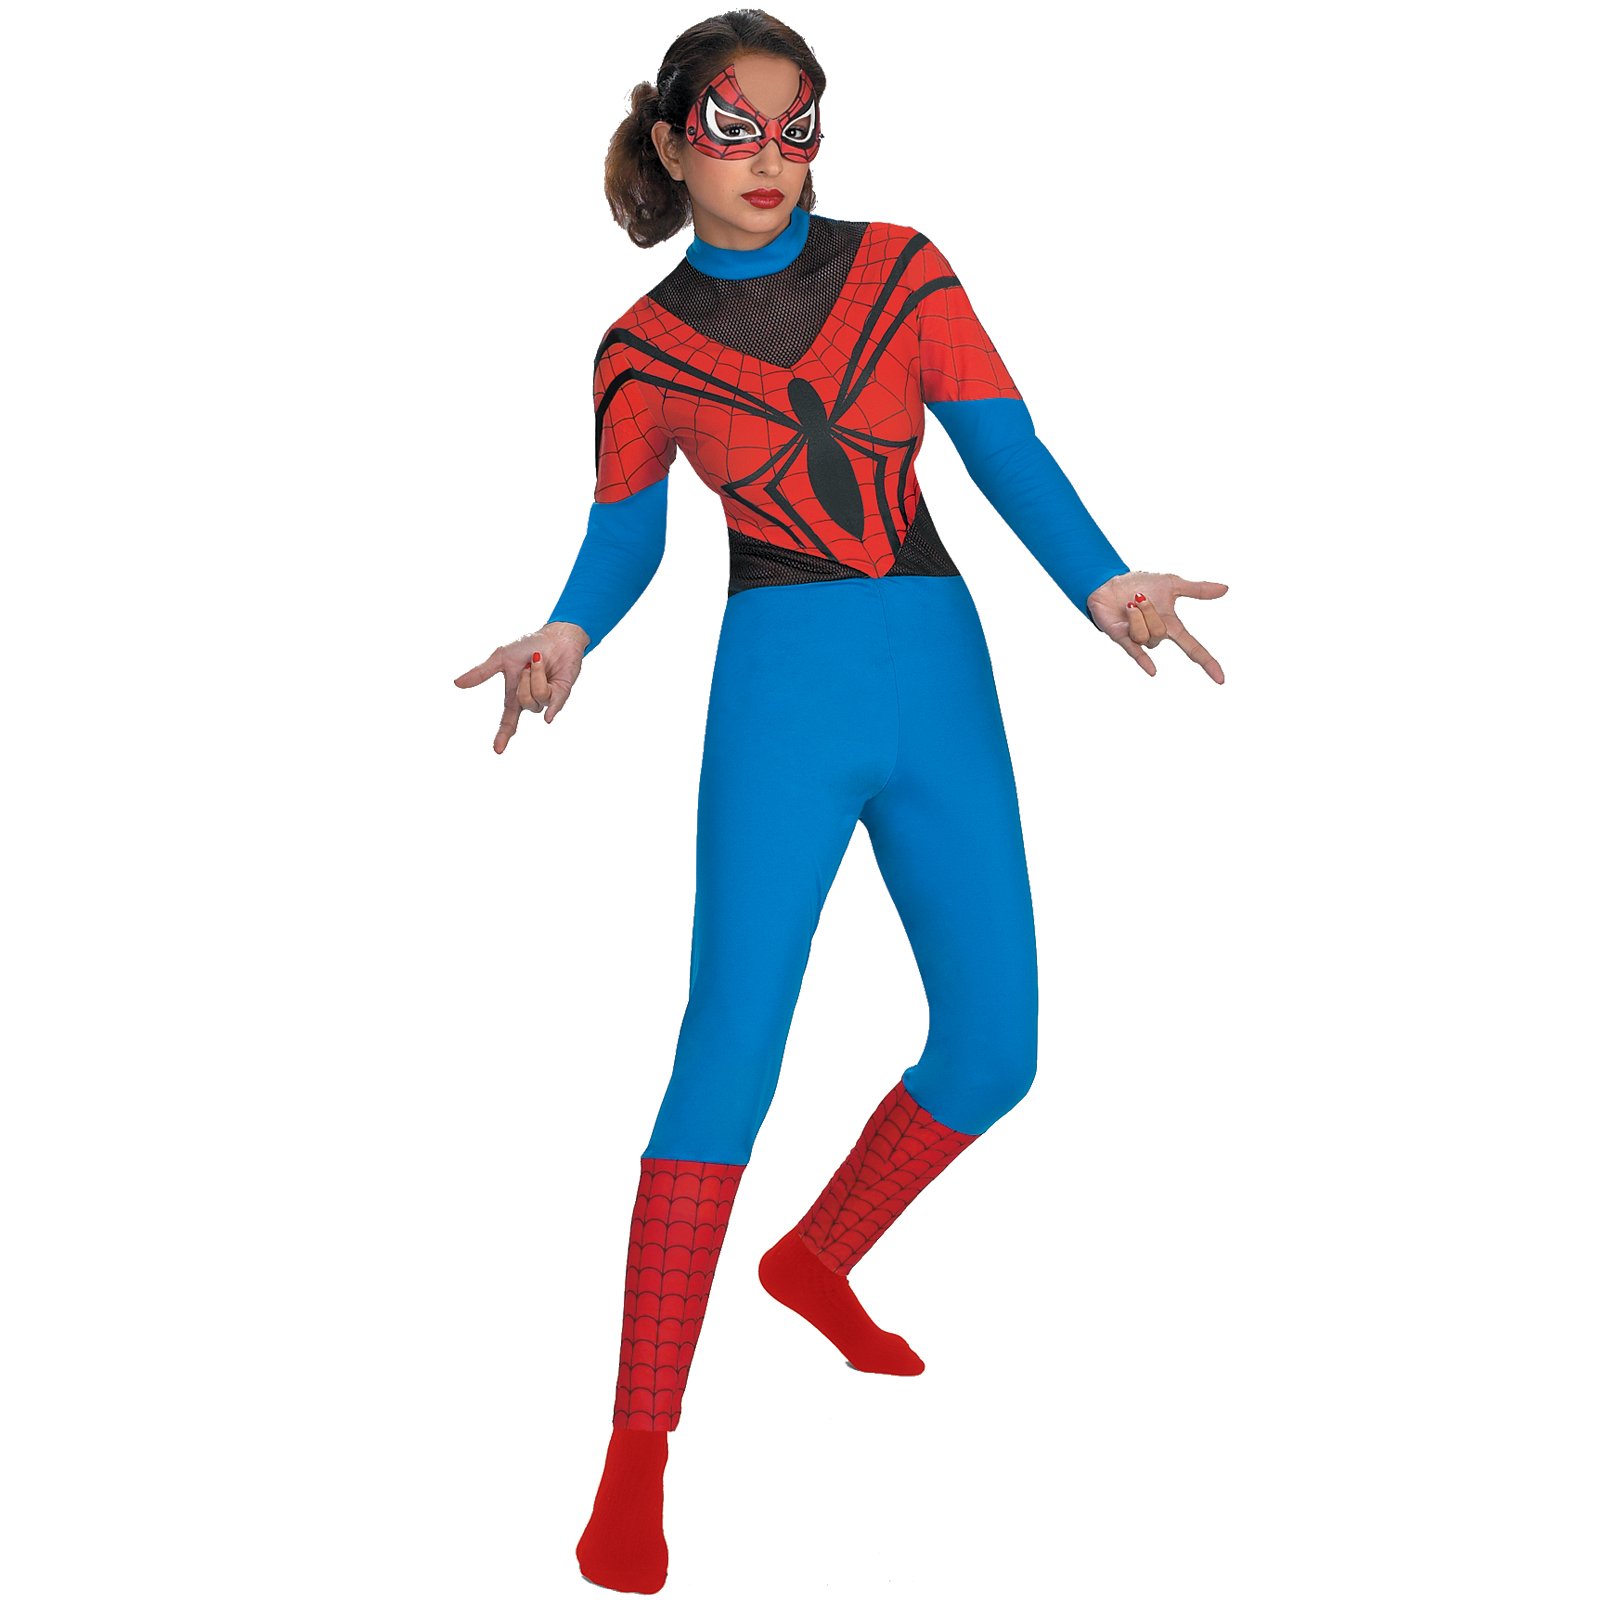 Spider-Man SPIDER GIRL Teen (fits up to 9 size)